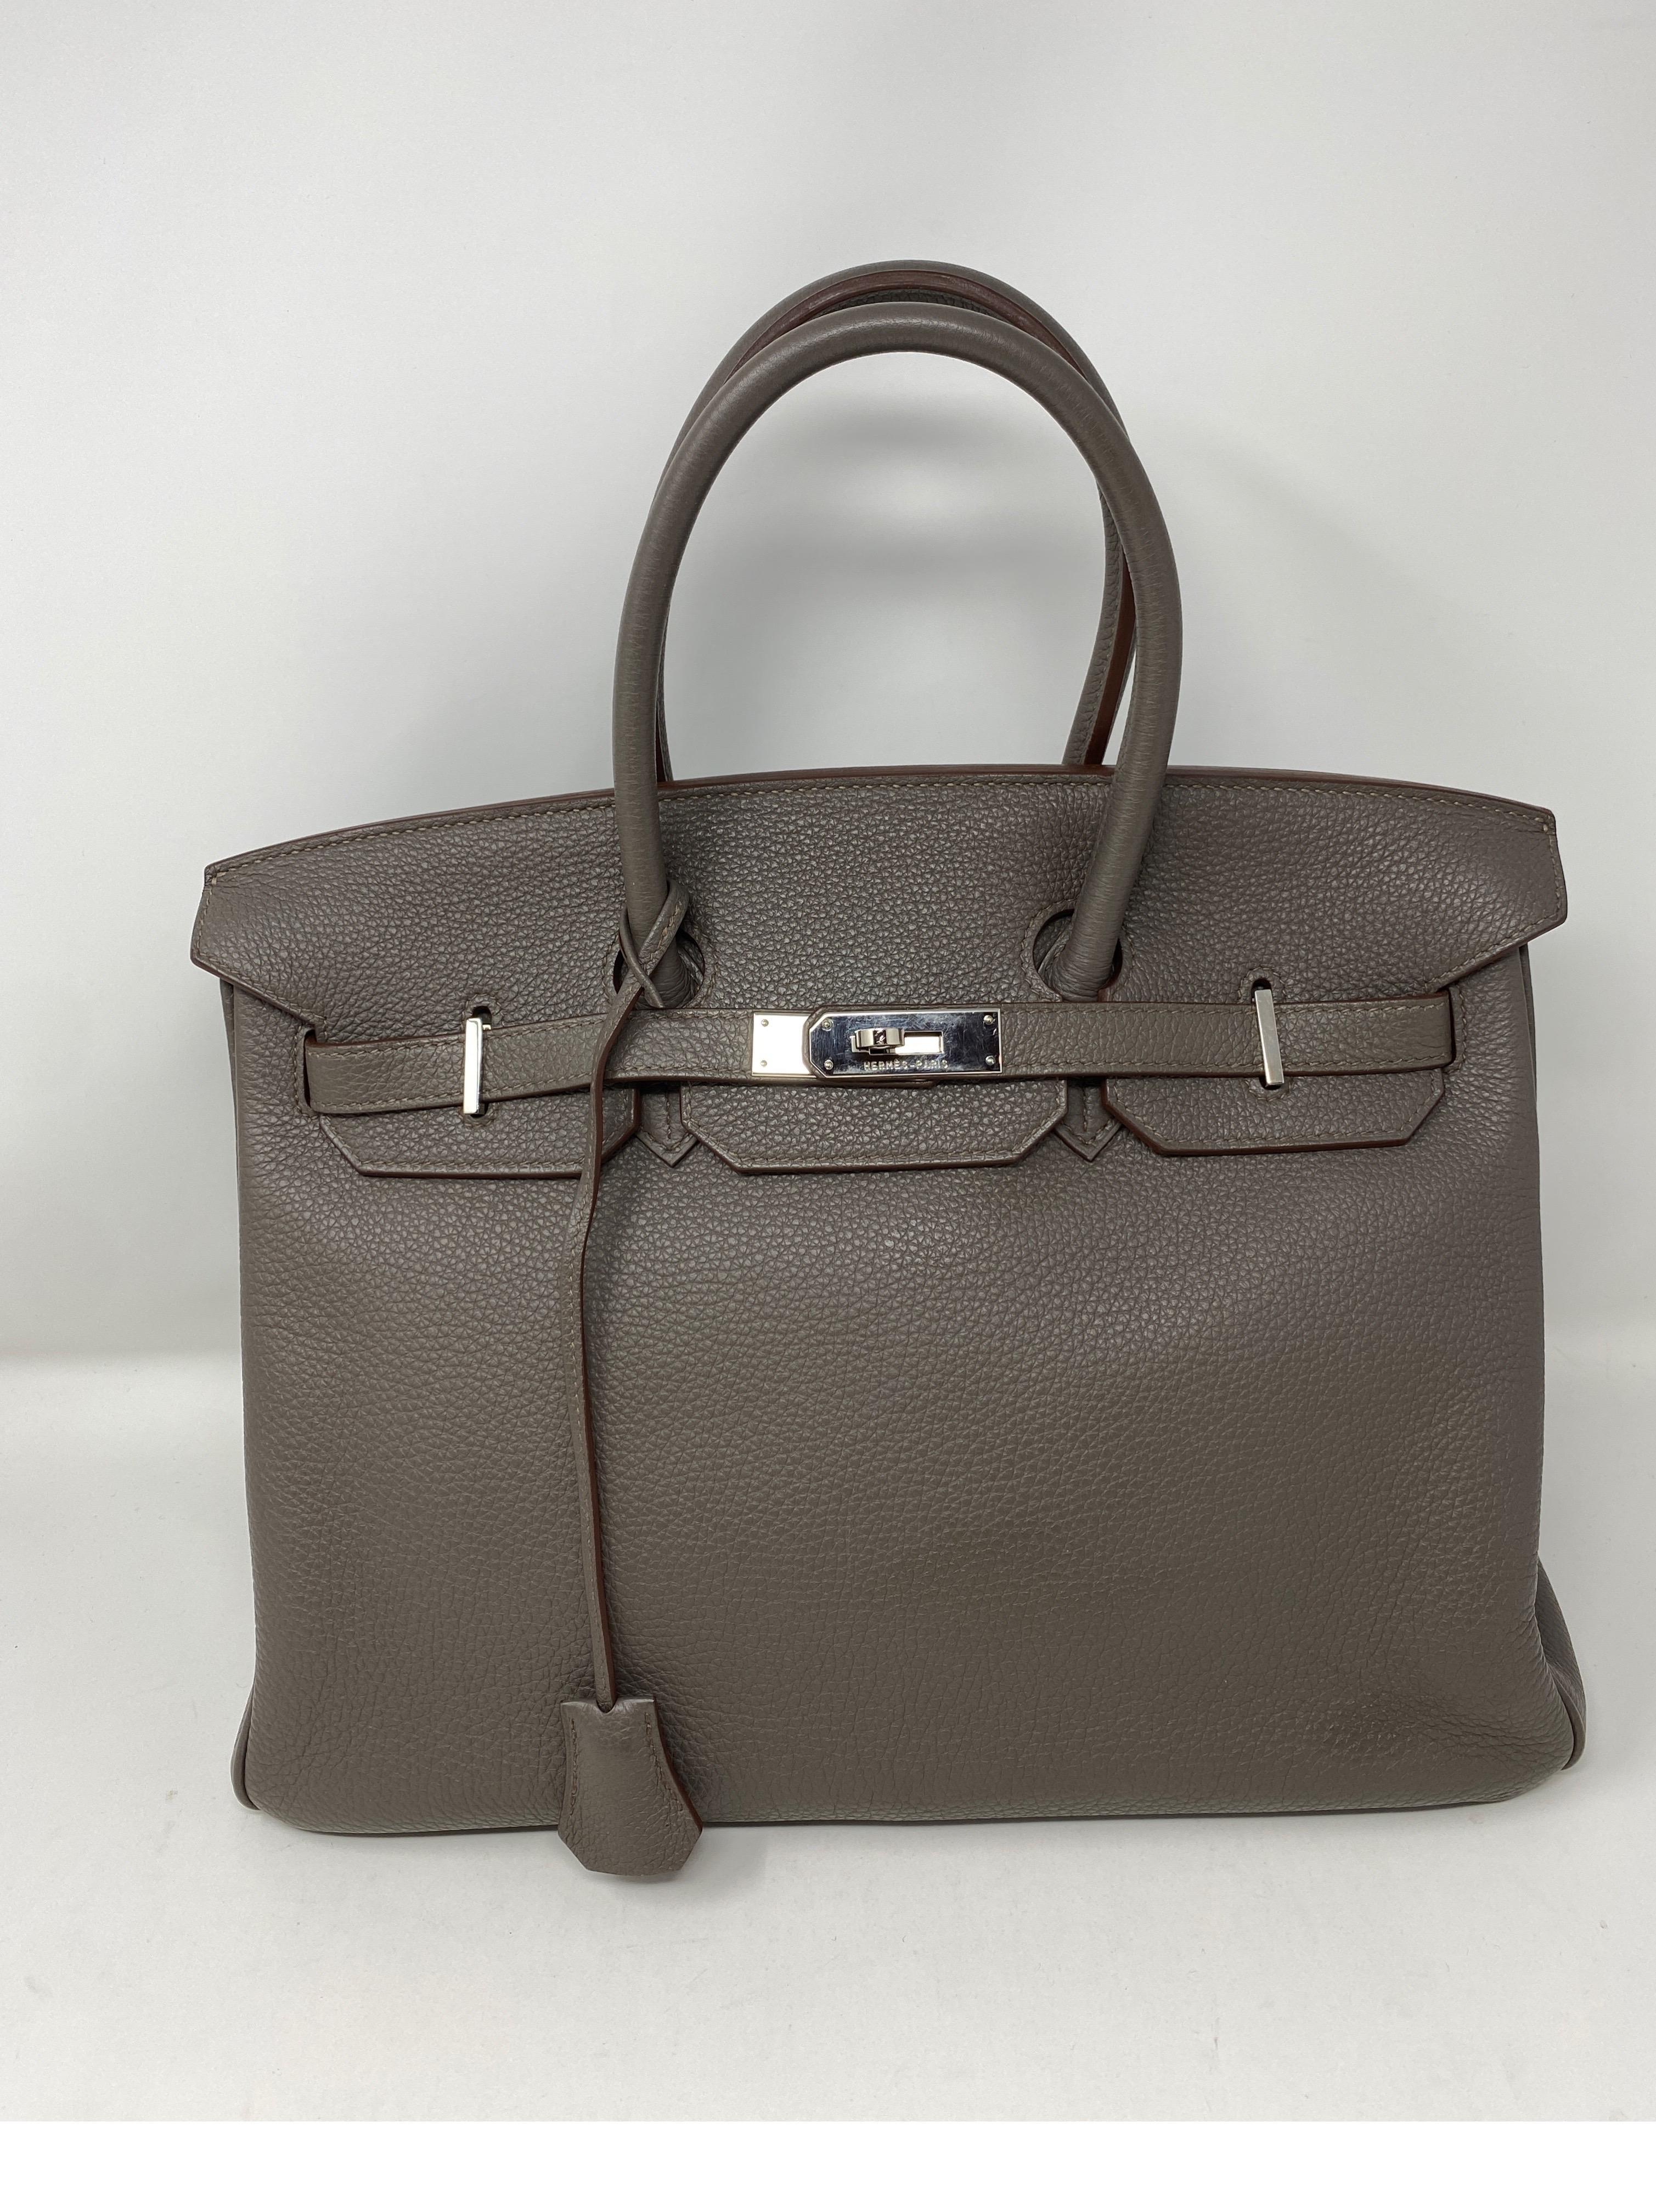 Hermes Etain Birkin 35 Bag. Palladium hardware. Togo leather. Gorgeous darker grey neutral color. Very good condition. Most wanted color. Pairs well with black and other colors. Don't miss out on this one. Includes clochette, lock, keys and dust